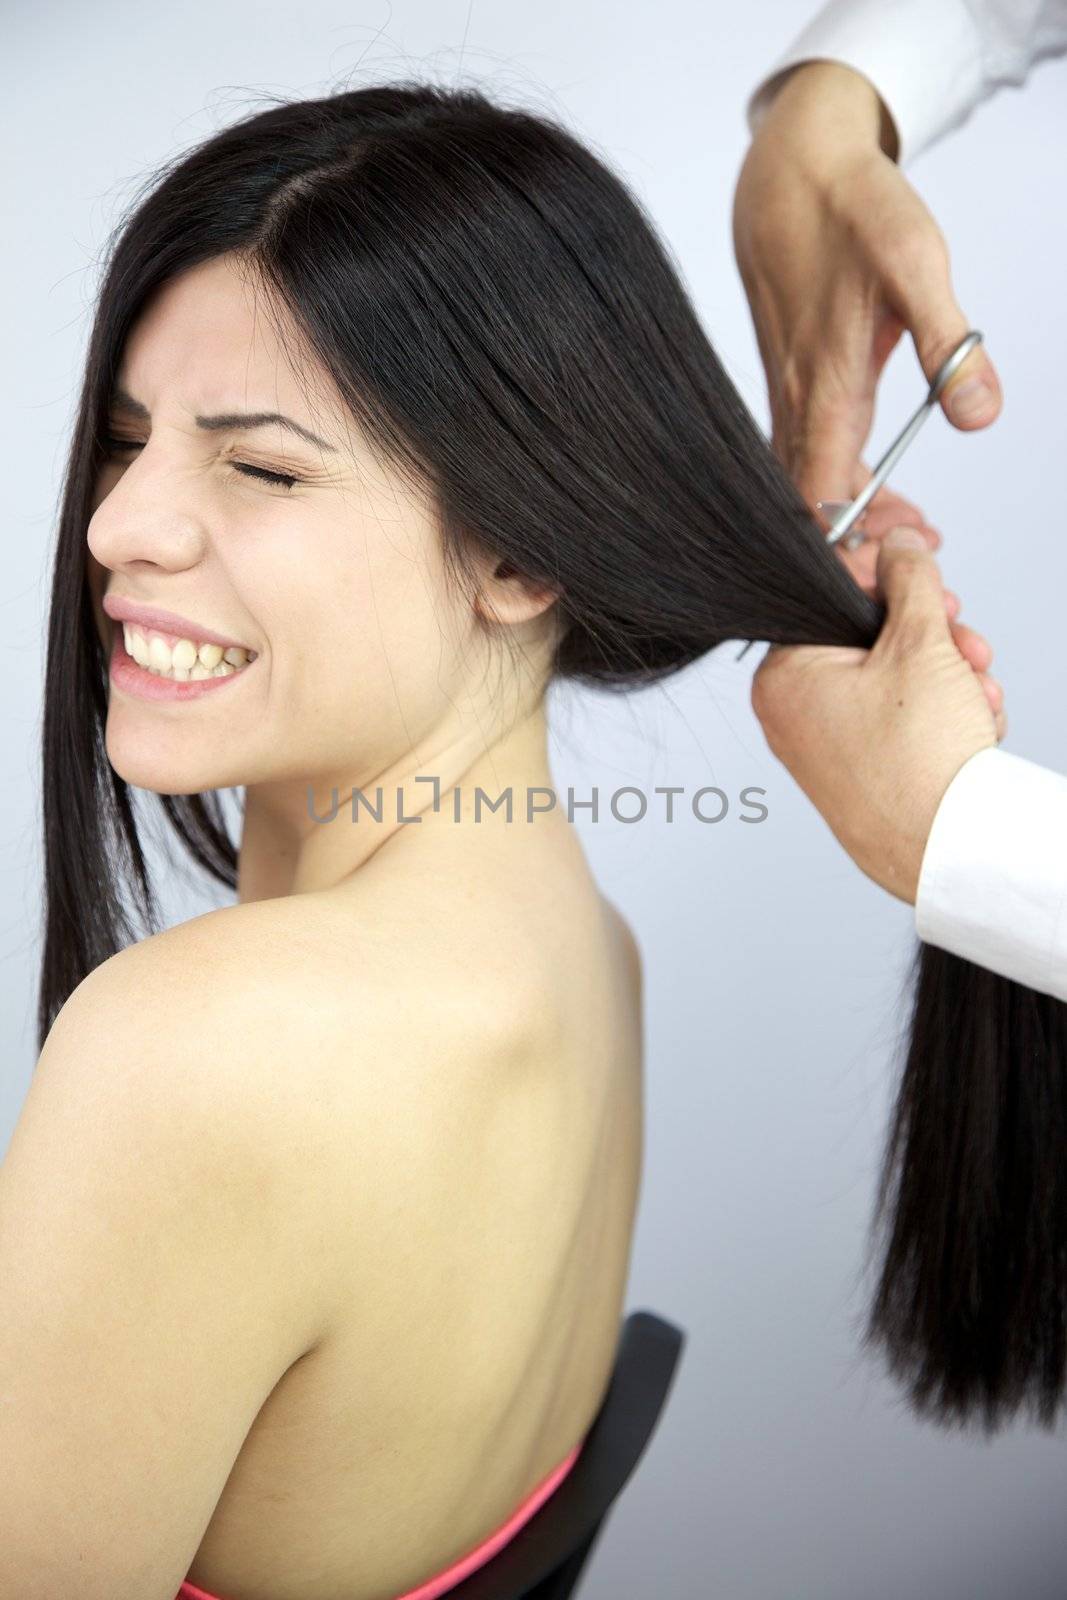 Beautiful woman closing eyes while hairdresser cuts her long hair by fmarsicano